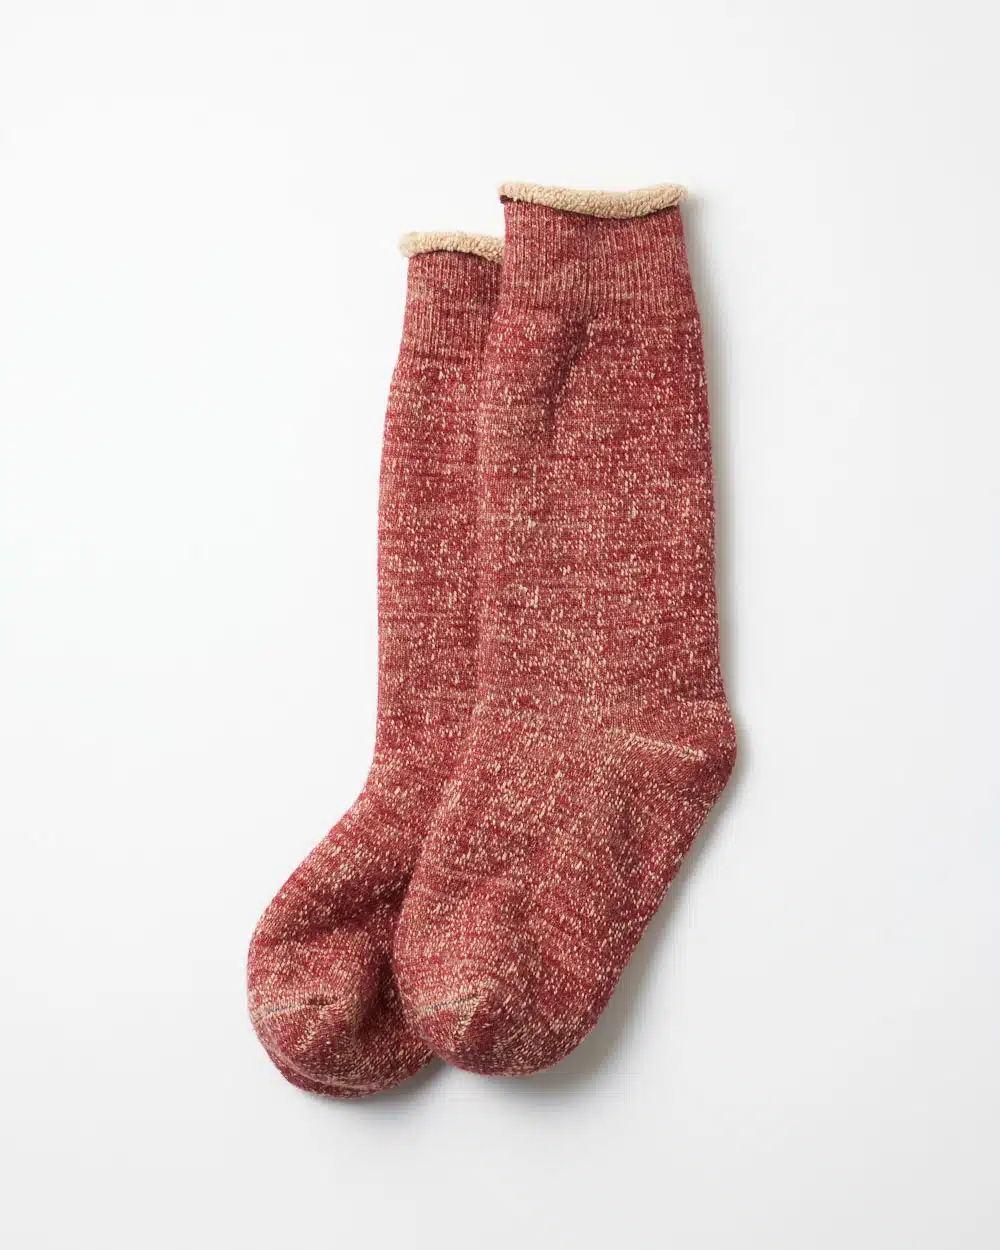 RoToTo Double Face Socks - Dark Red/Brown